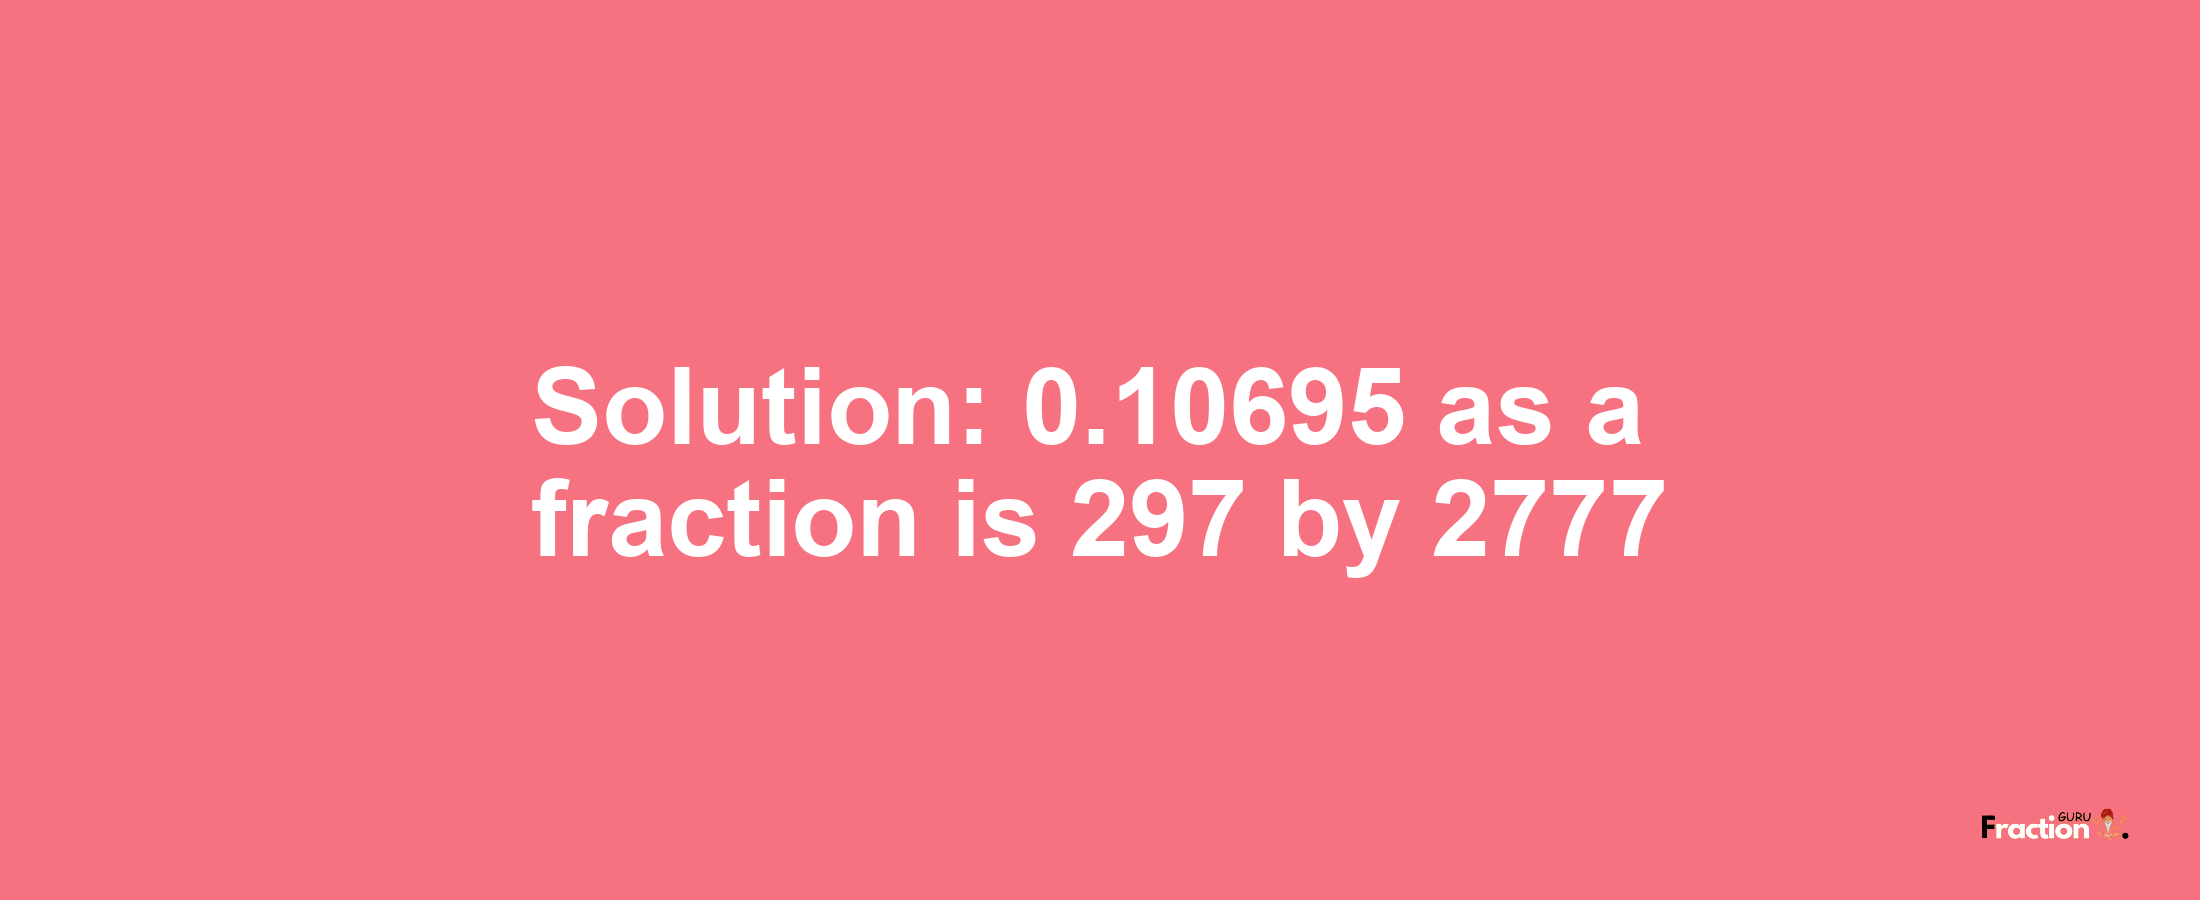 Solution:0.10695 as a fraction is 297/2777